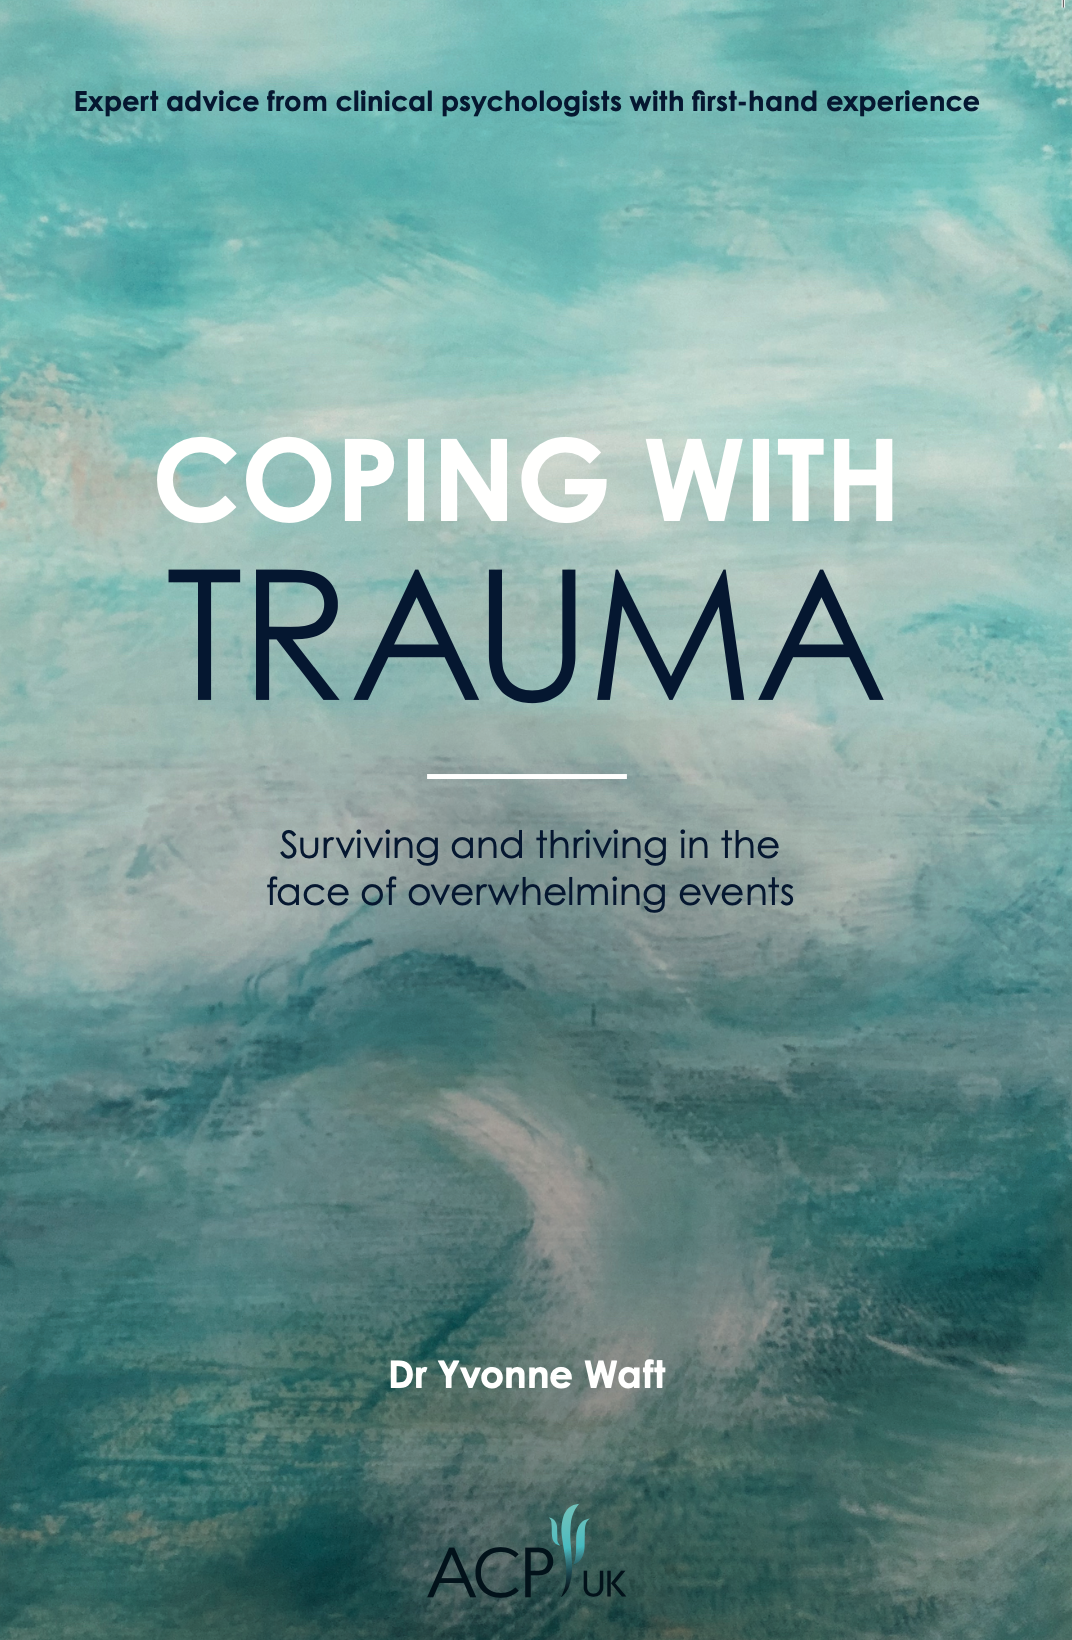 Coping With Trauma: Surviving and Thriving in the Face of Overwhelming Events